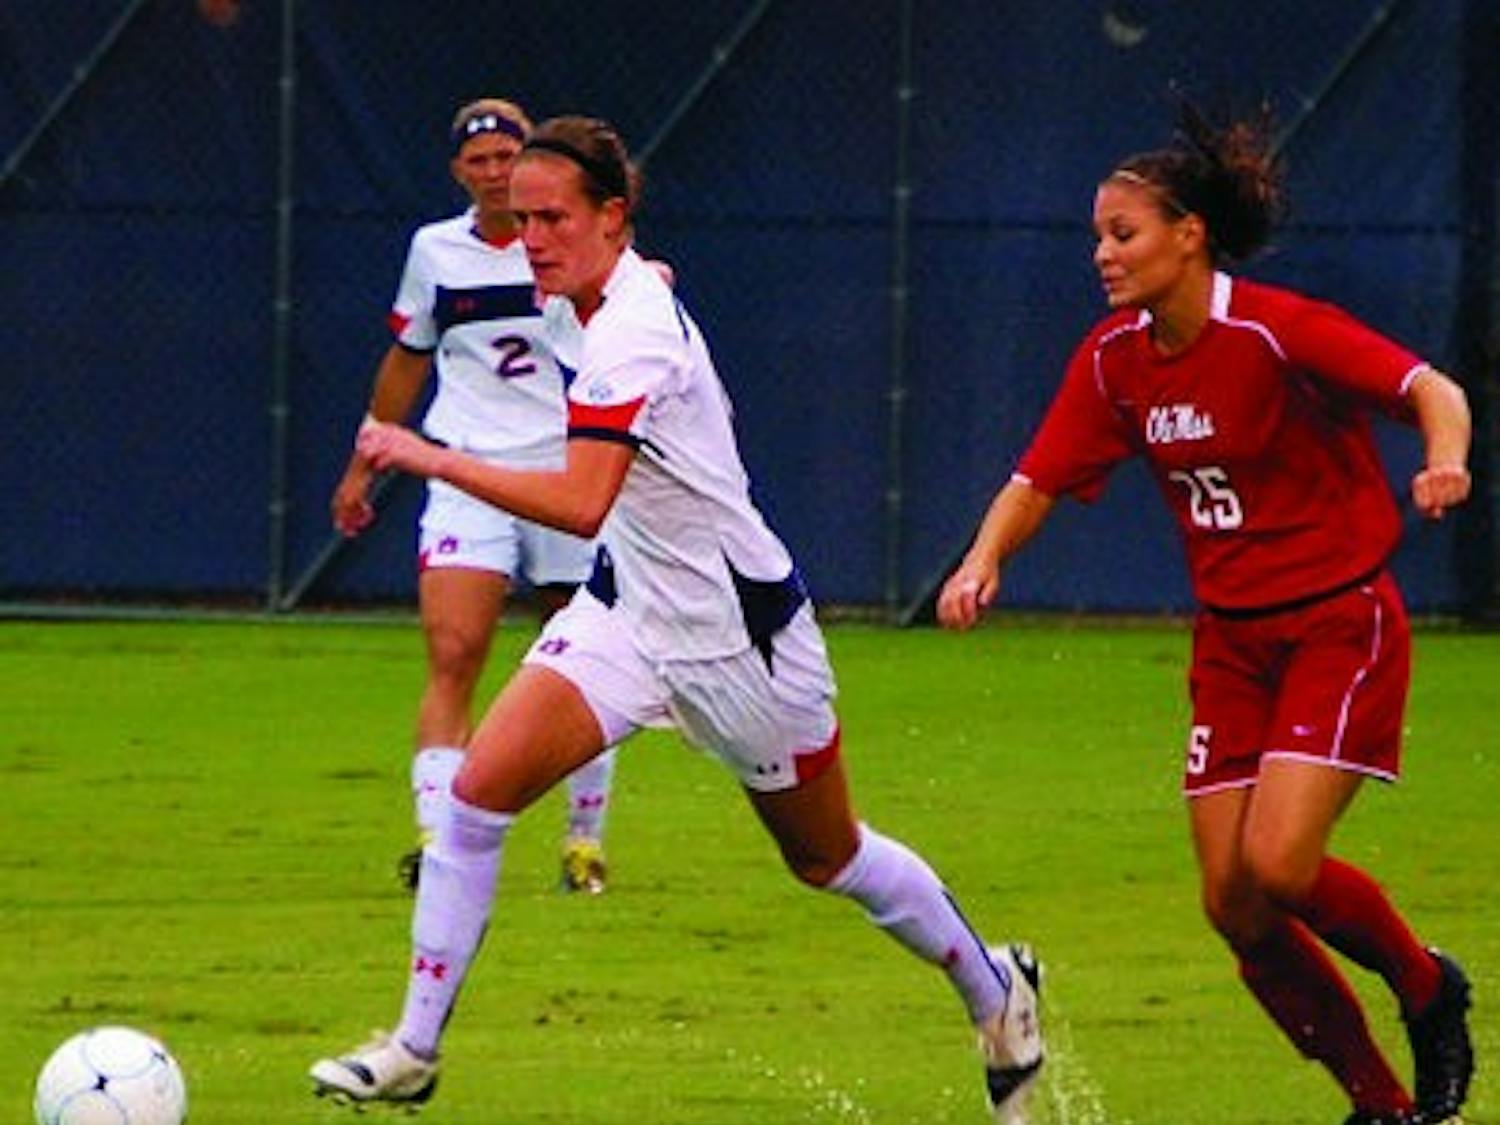 Auburn's Mary Coffed dribbles by an Ole Miss defender. (Katie Shelton/ Photo Staff)